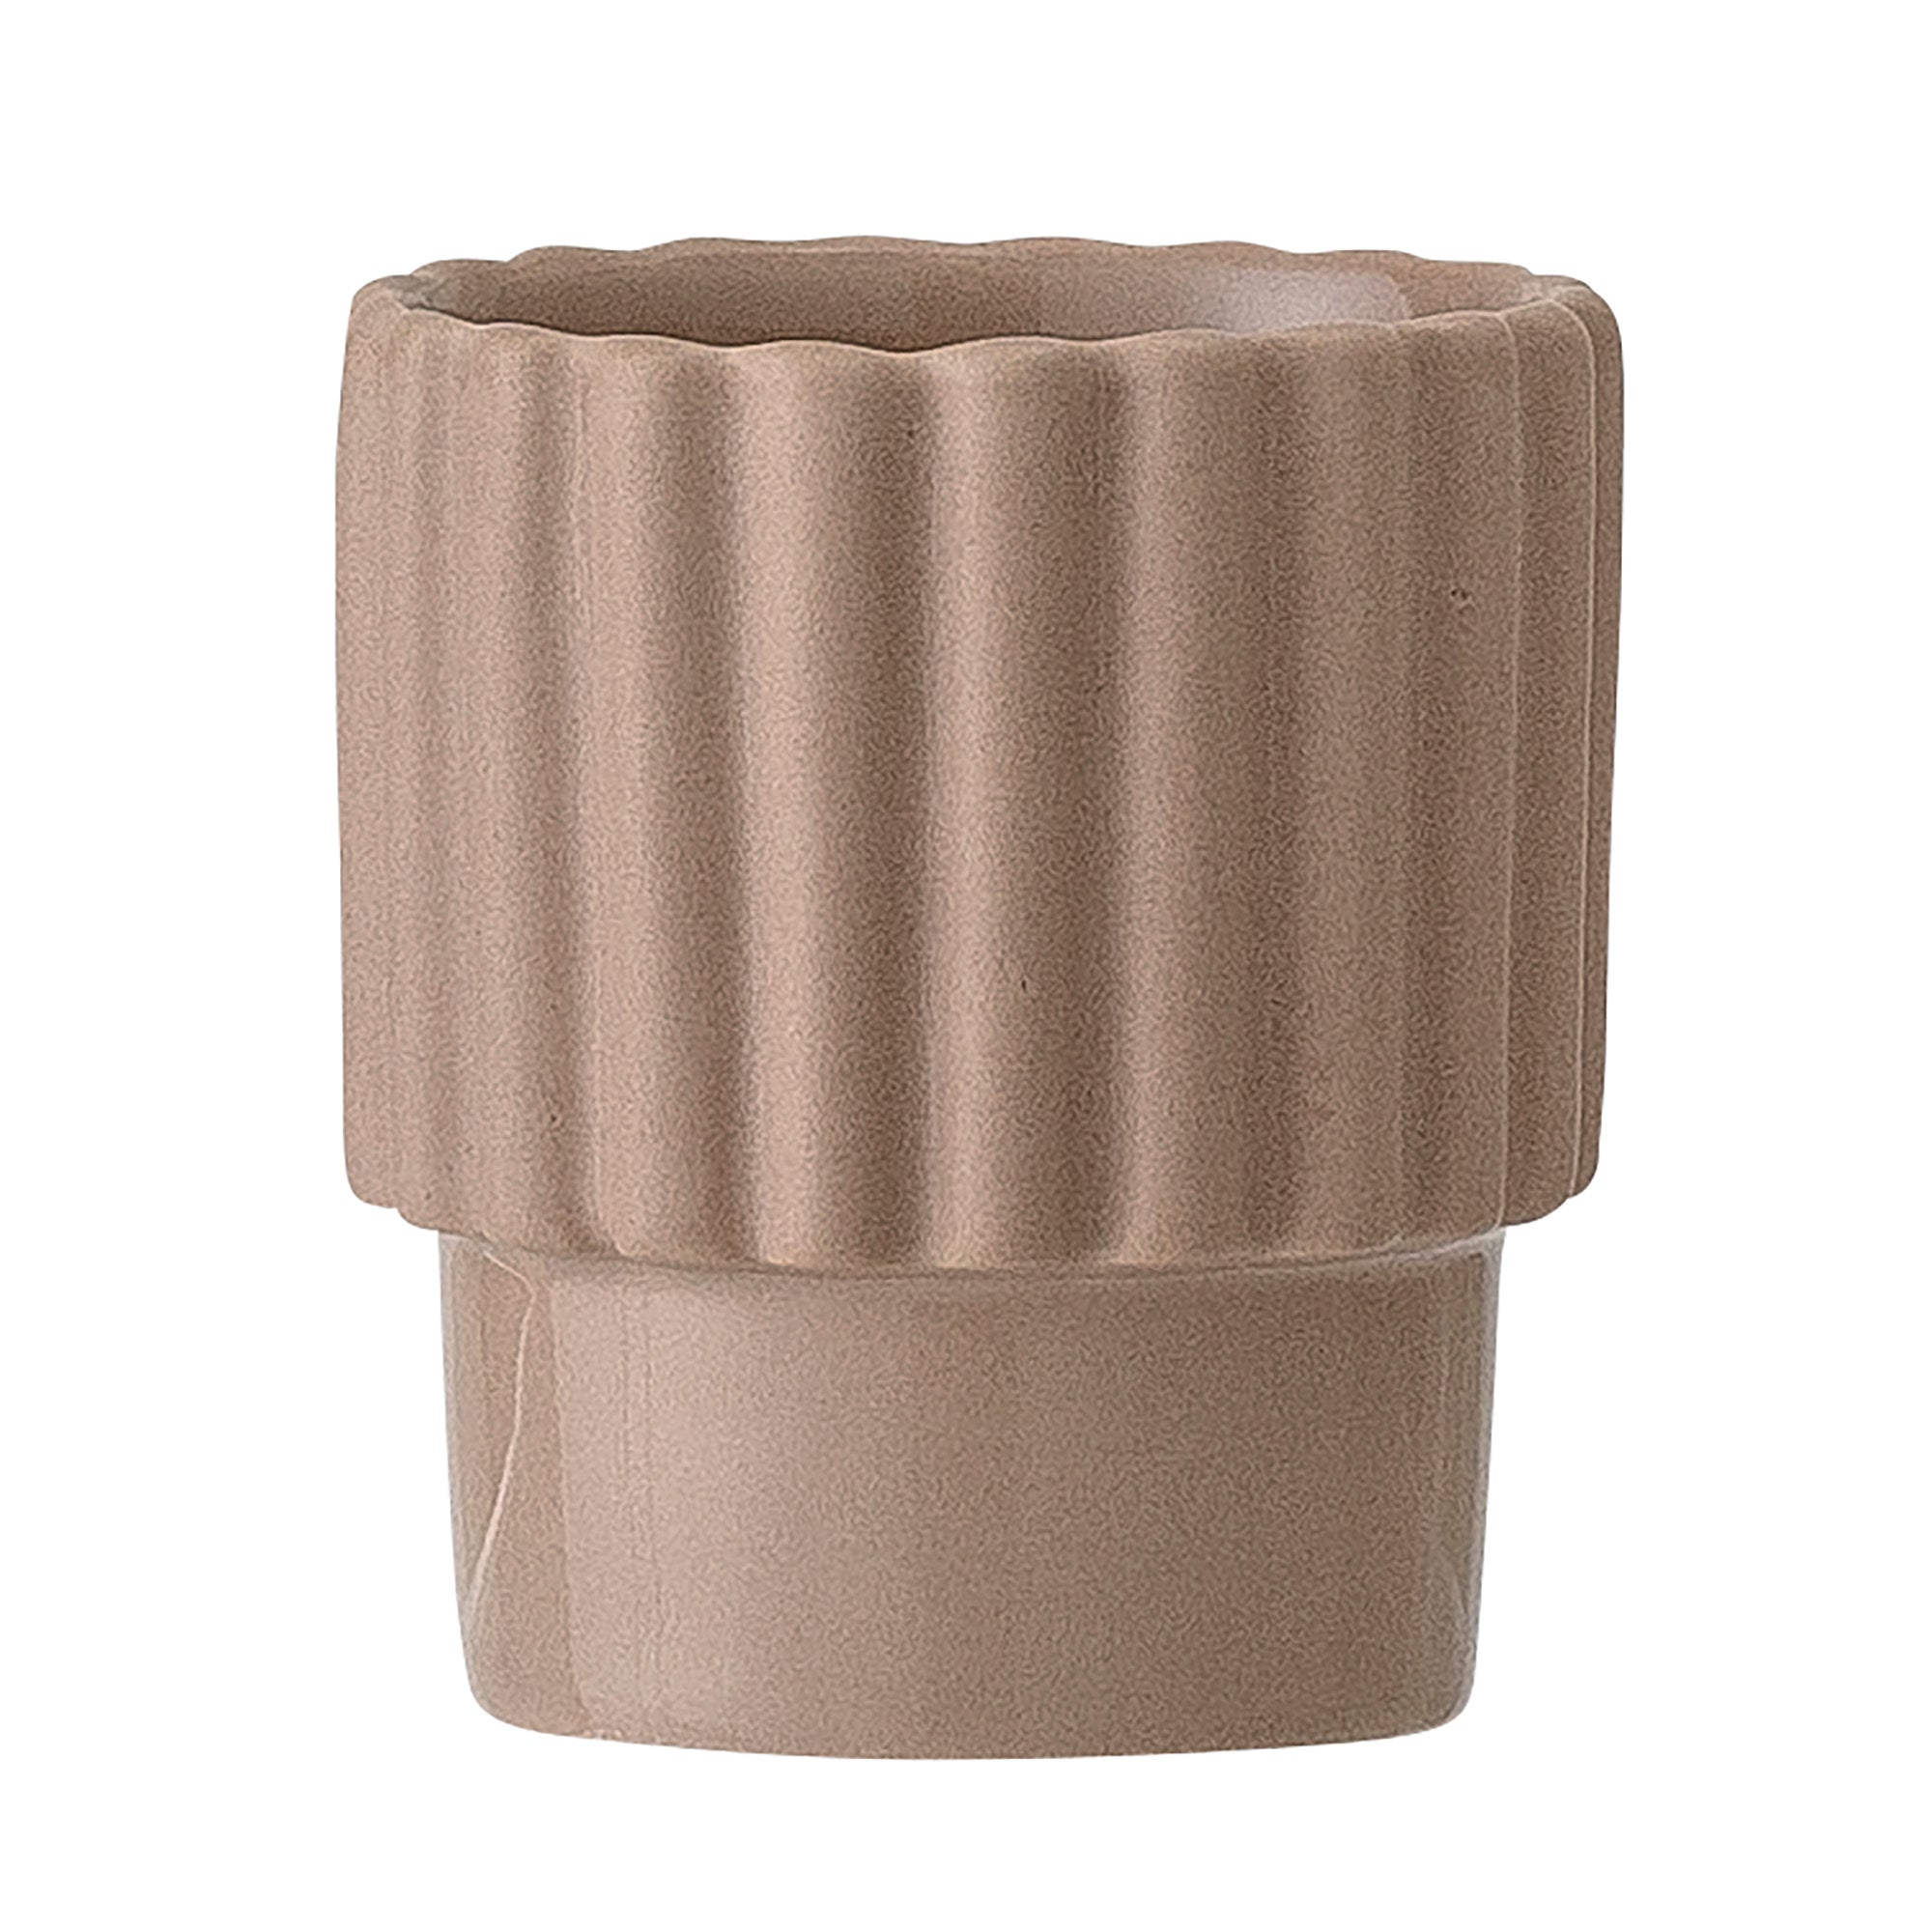 Bloomingville - Candle holder, brown stoneware